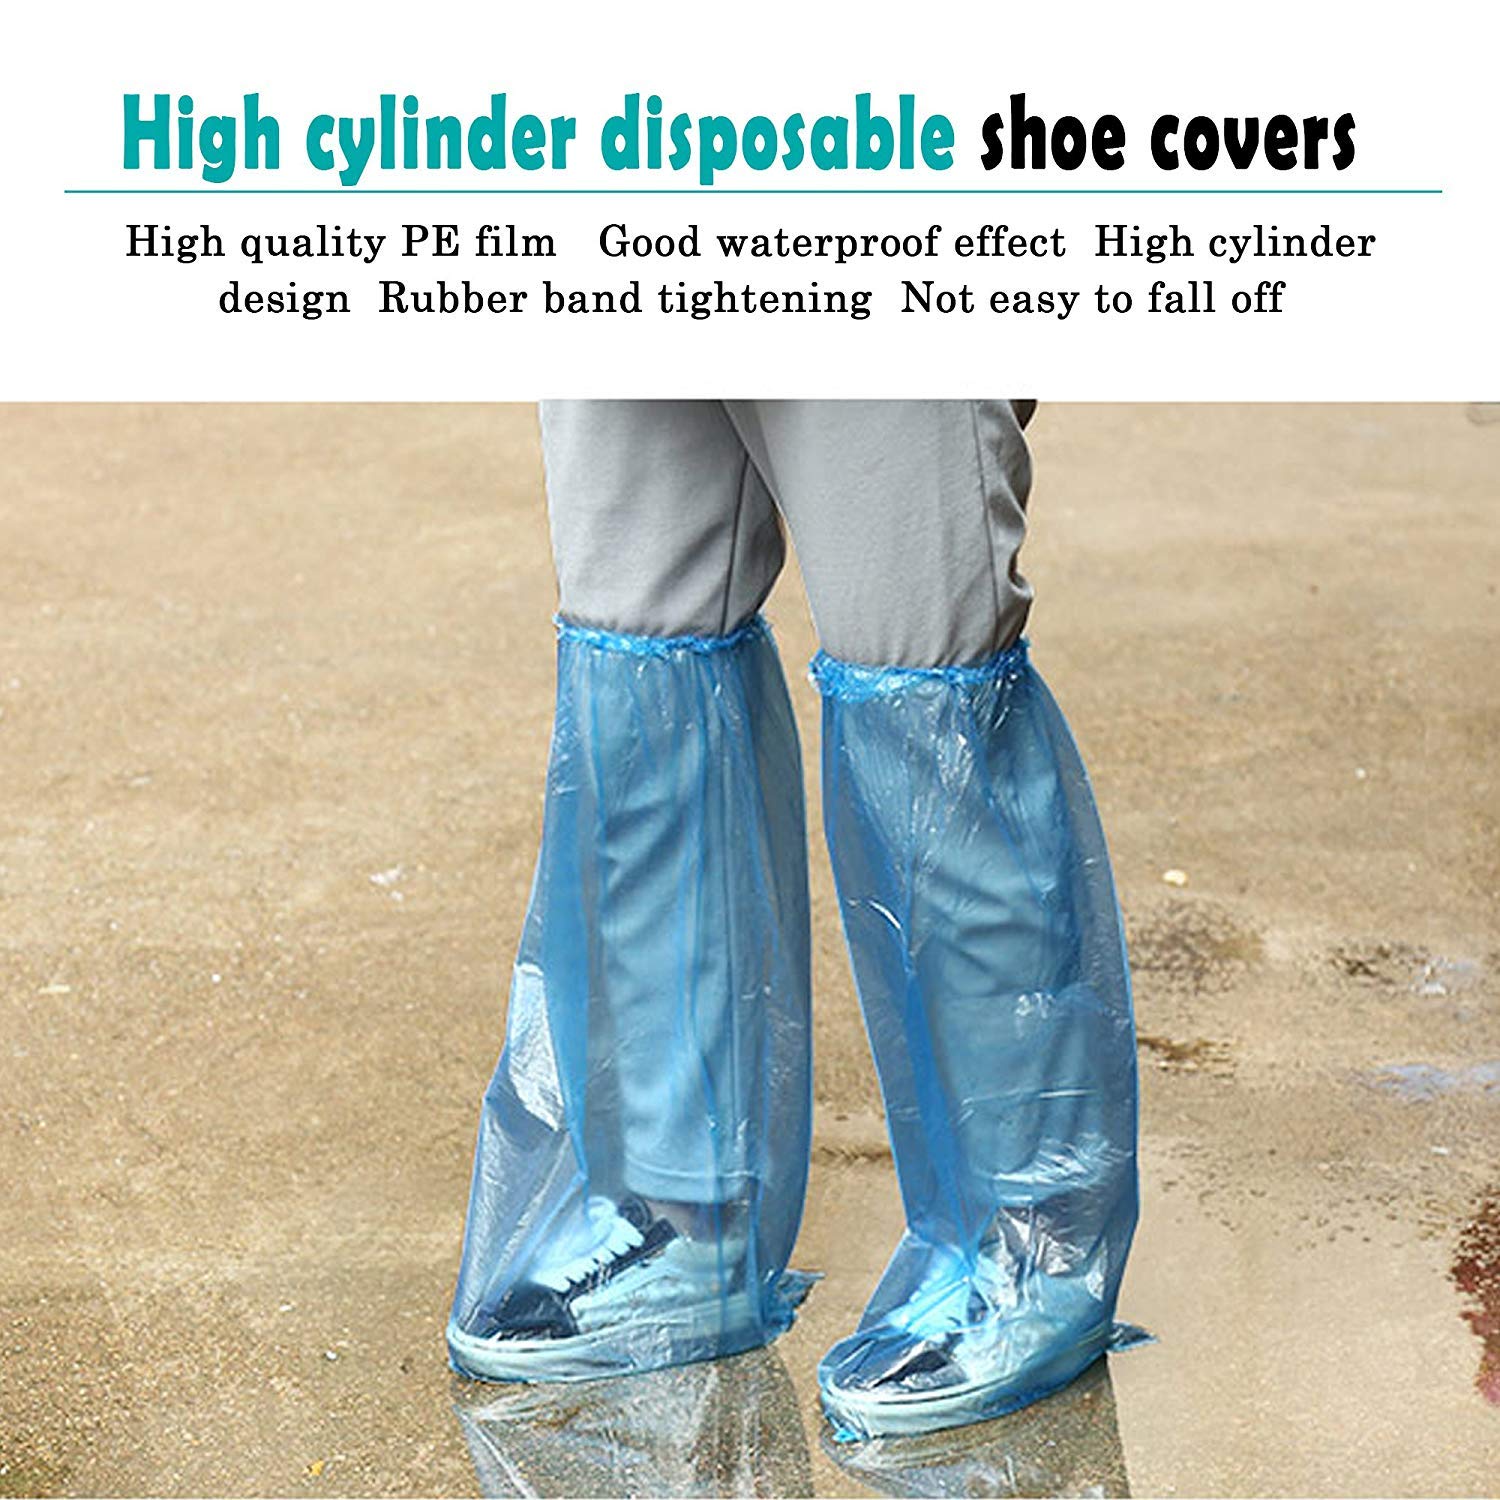 Disposable Shoe Covers 40 Pairs Blue Rain Shoes and Boots Cover Plastic Long Shoe Cover Clear Waterproof Anti-Slip Overshoe for Women Men - Opticdeals